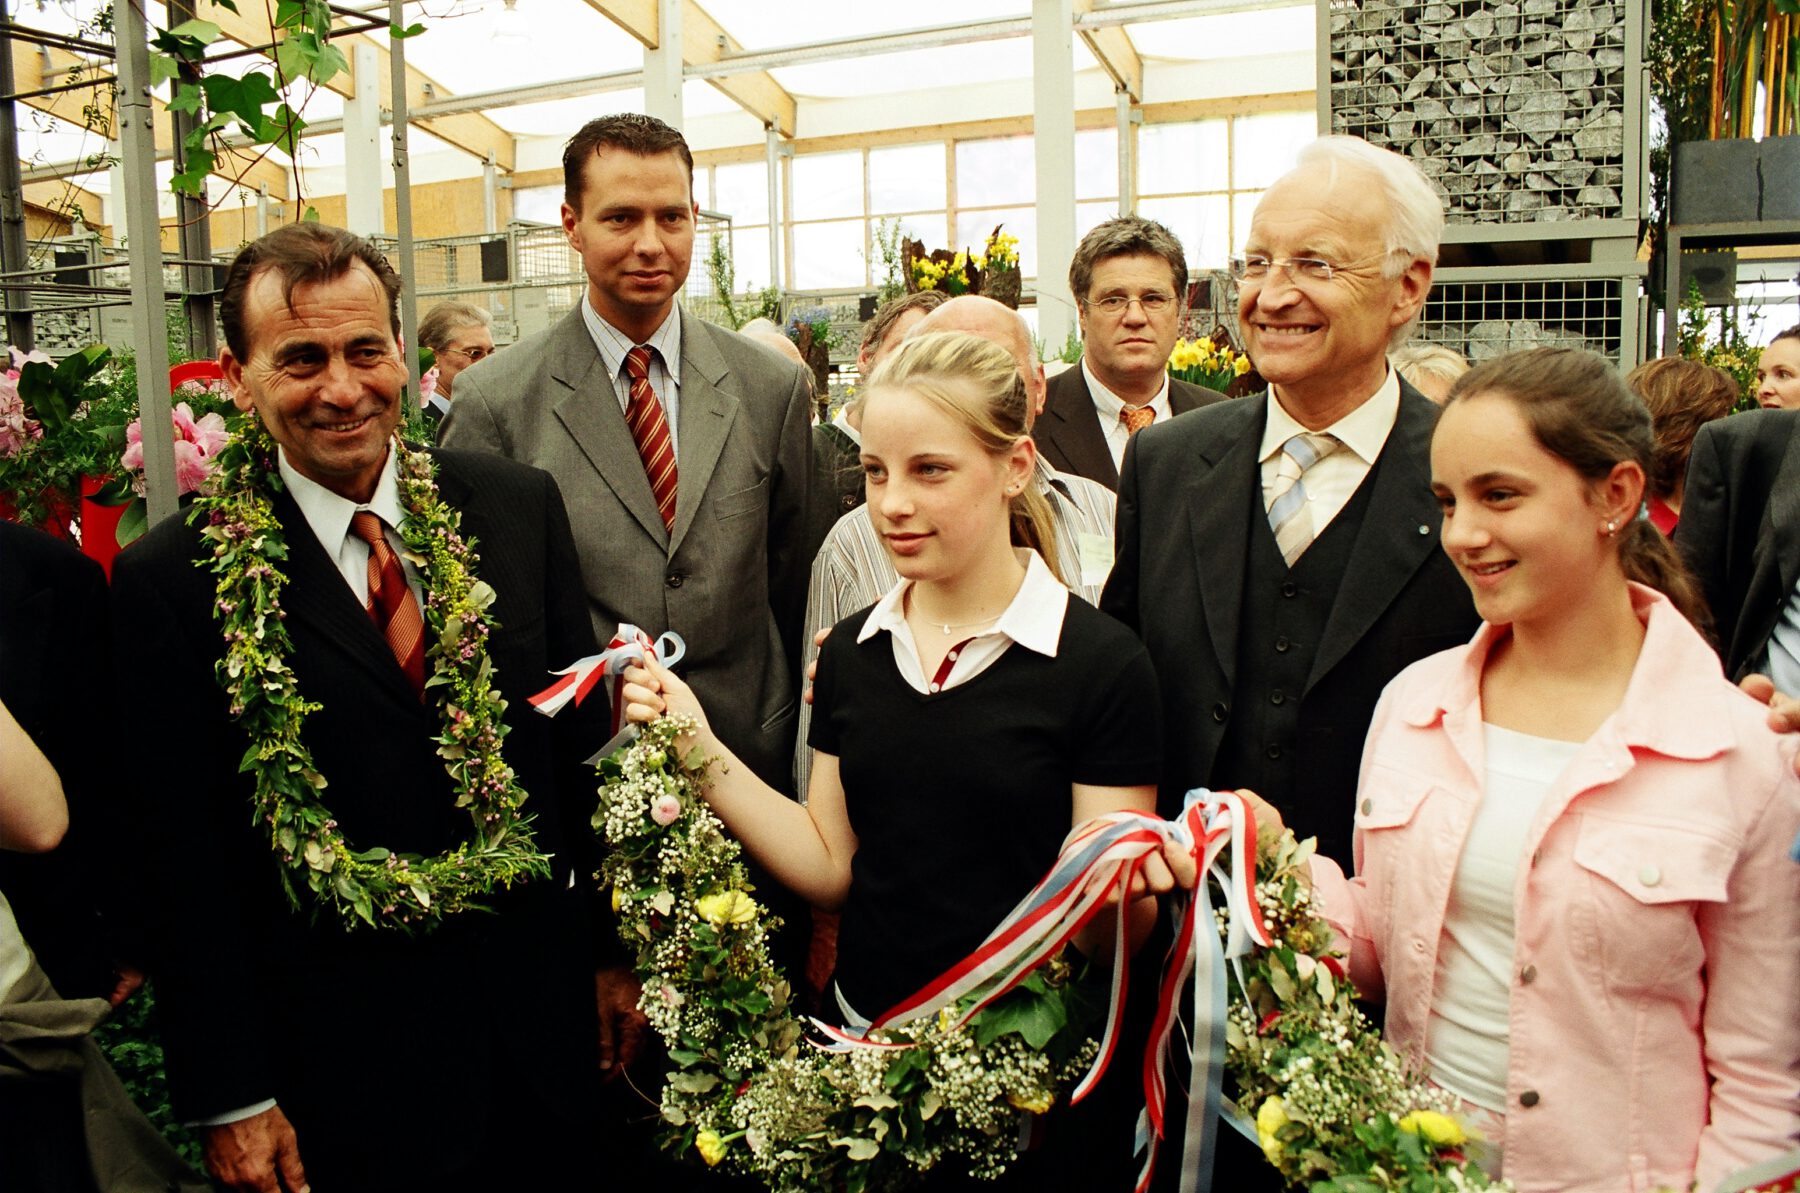 Opening of the 2004 State Garden Show in Burghausen